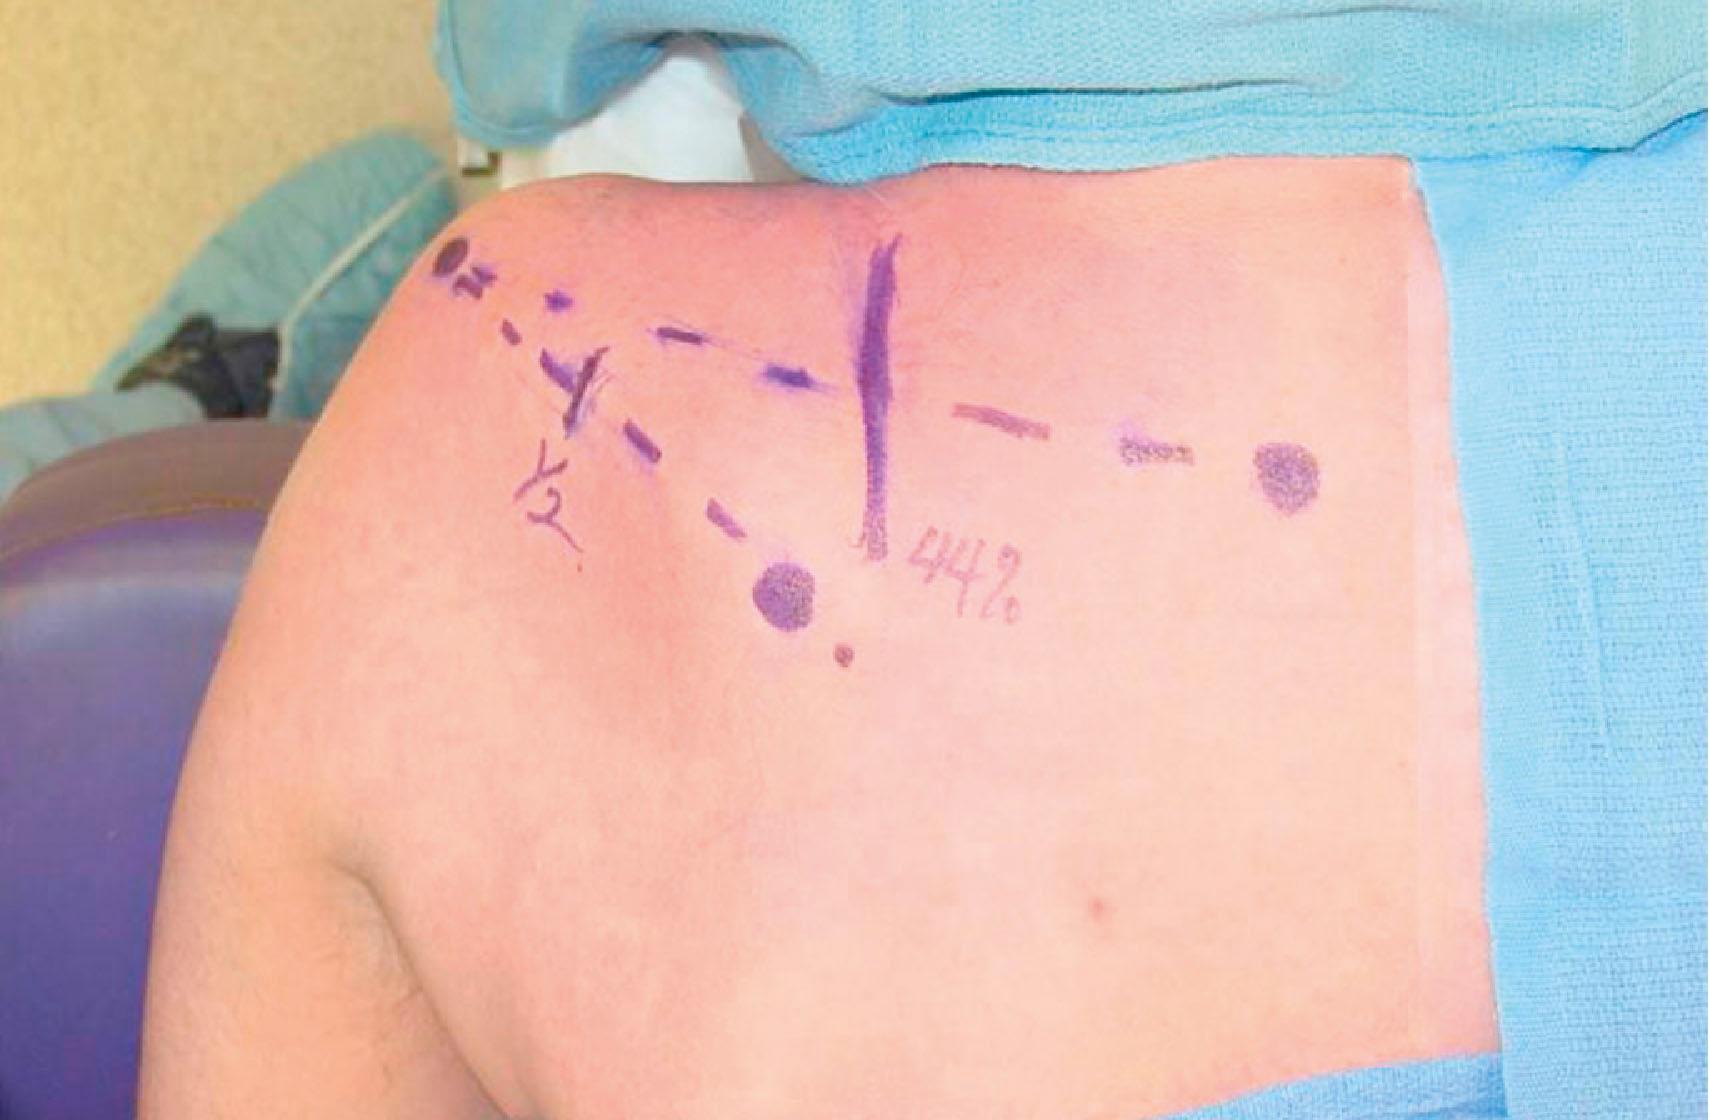 Figure 26.5, Surface markings for posterior approach to spinal accessory to suprascapular. The spinal accessory nerve is located 44% of the way along a line connecting the dorsal midline to the acromion. The suprascapular nerve is located at the halfway point between the medial border of the scapula and the acromion on an obliquely oriented line at the superior aspect of the scapular spine. It runs in the suprascapular notch.